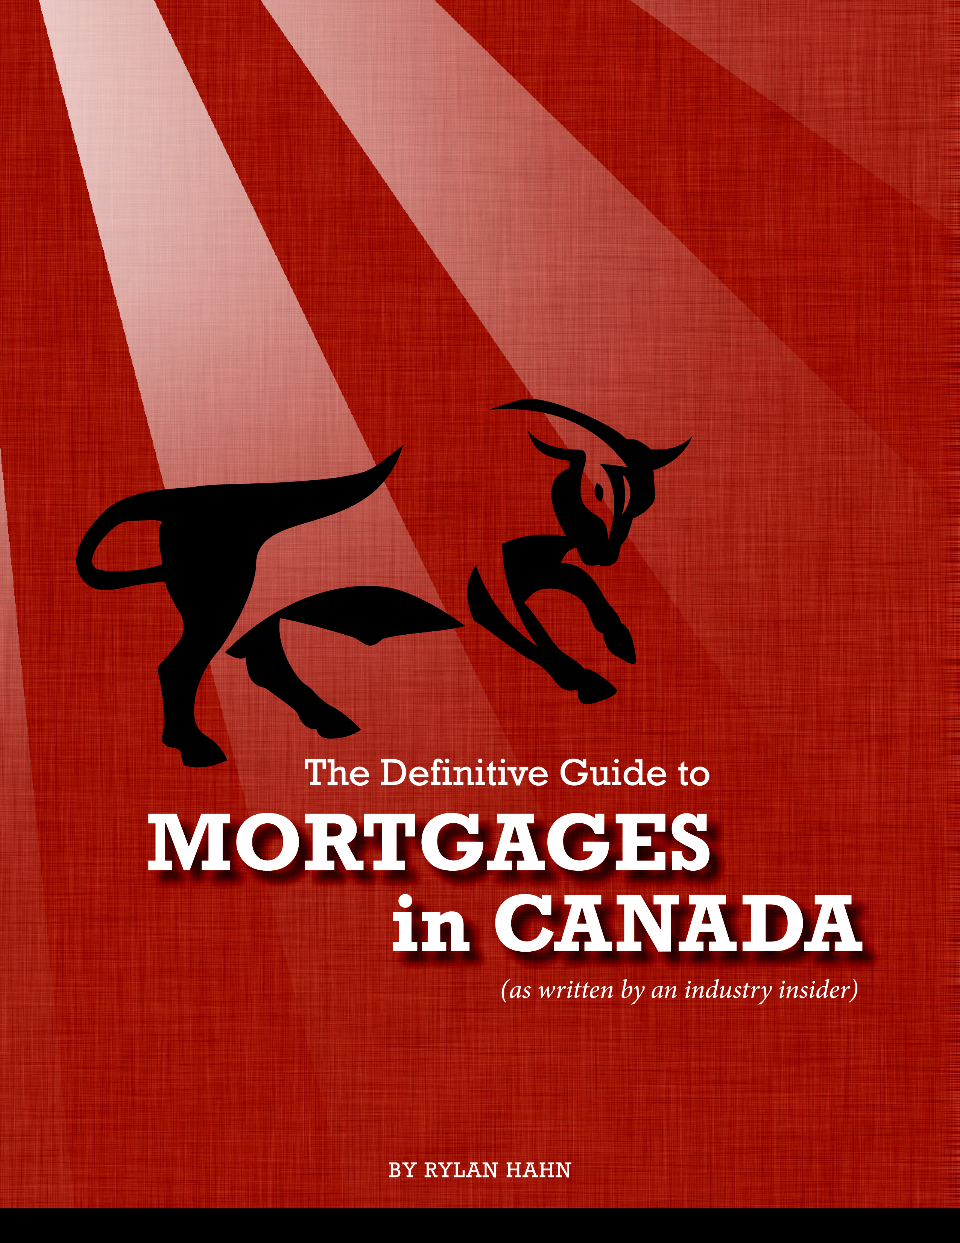 The Definitive Guide to Mortgages in Canada